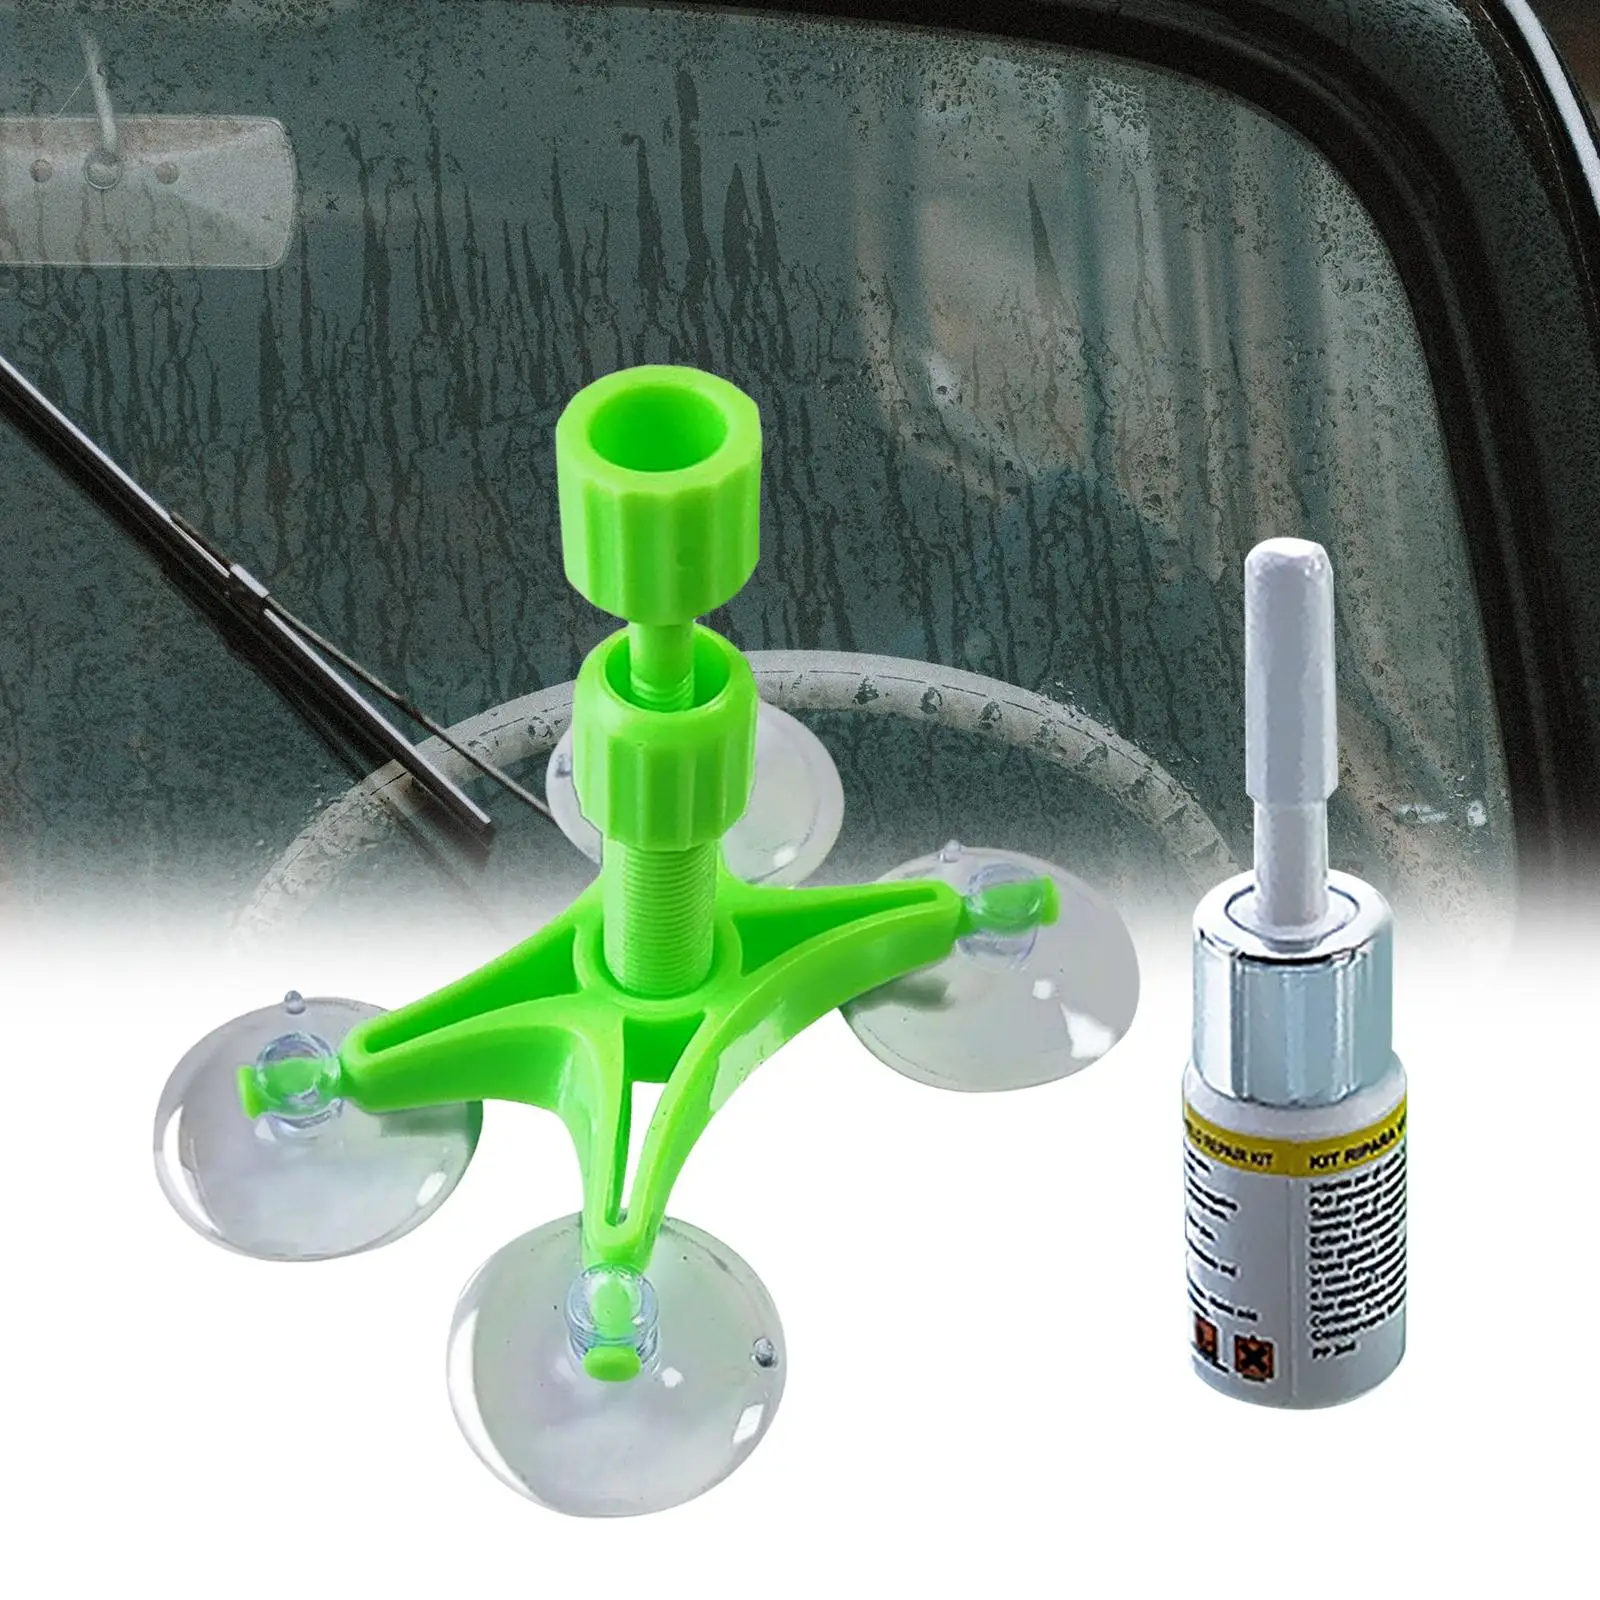 Car Auto Glass Windshield Fluid Repair Set Easy to Operate DIY Widely Use